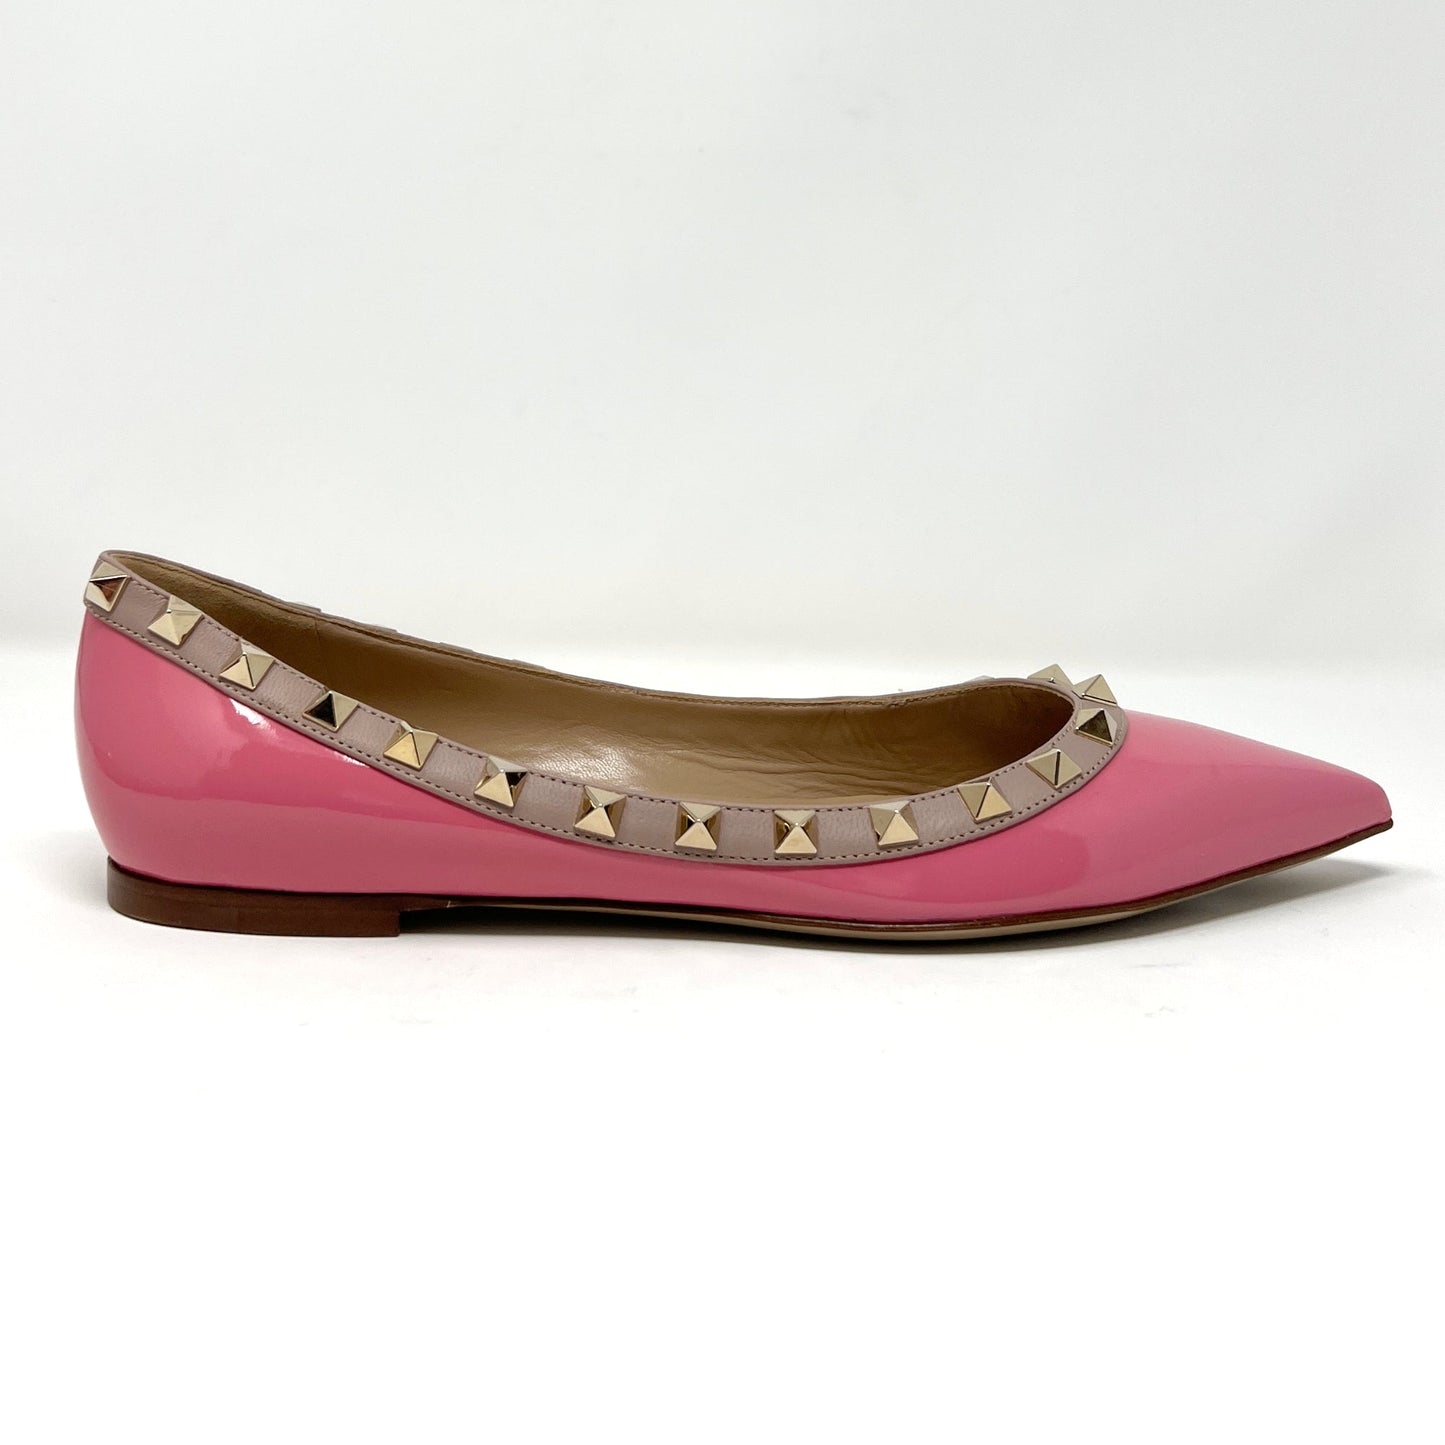 Valentino Rockstud Studded Two Toned Pink Tan Leather Pointed Toe Ballet Flats Size EU 37